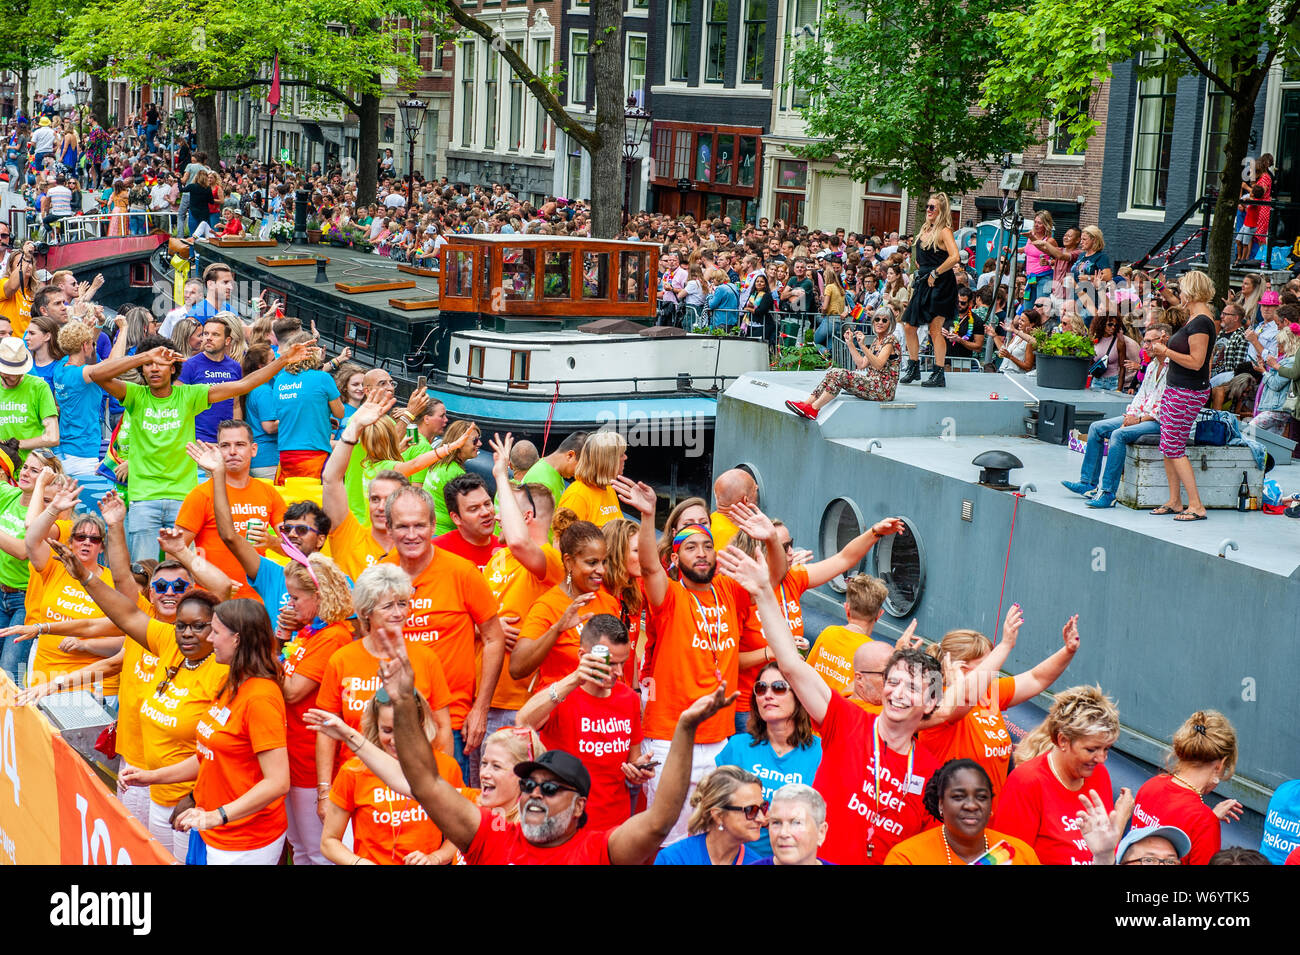 A Group Of People Wearing Colourful Clothes Are Seen On A Boat During The Parade The Canal